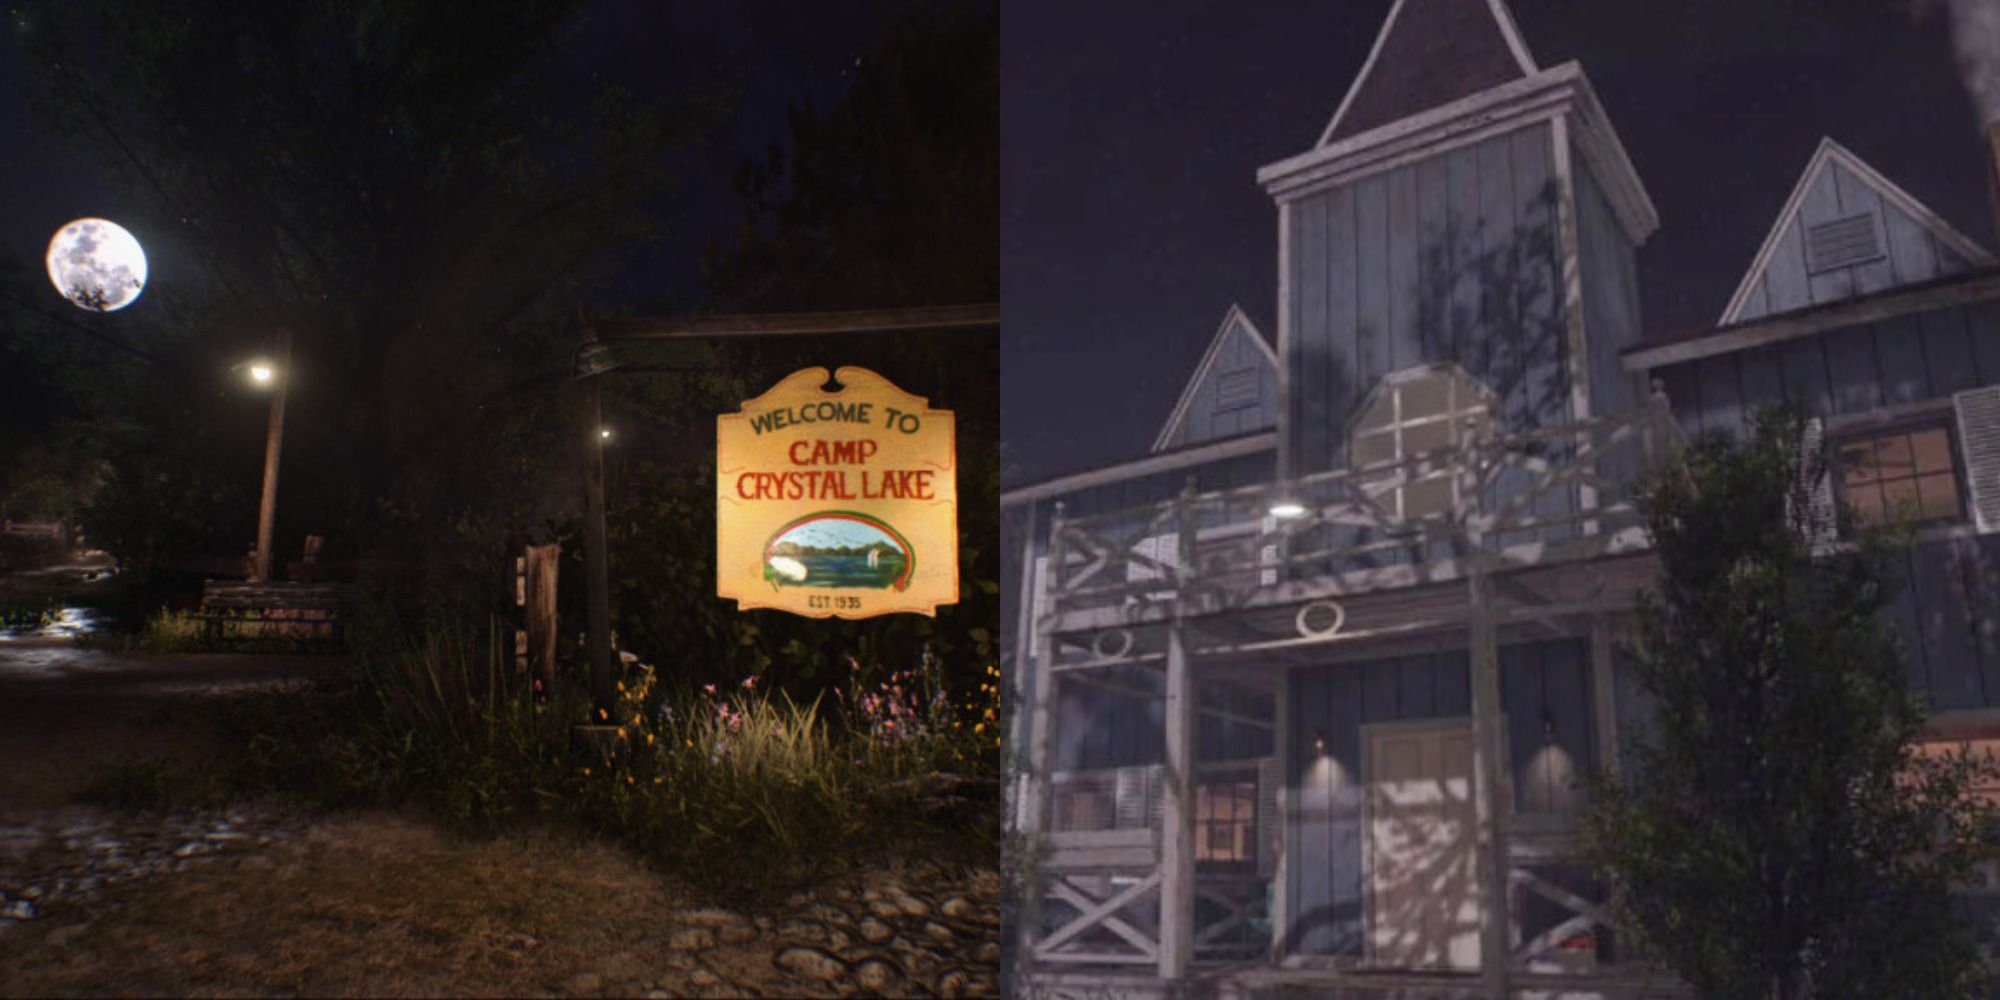 friday 13th film location then and now